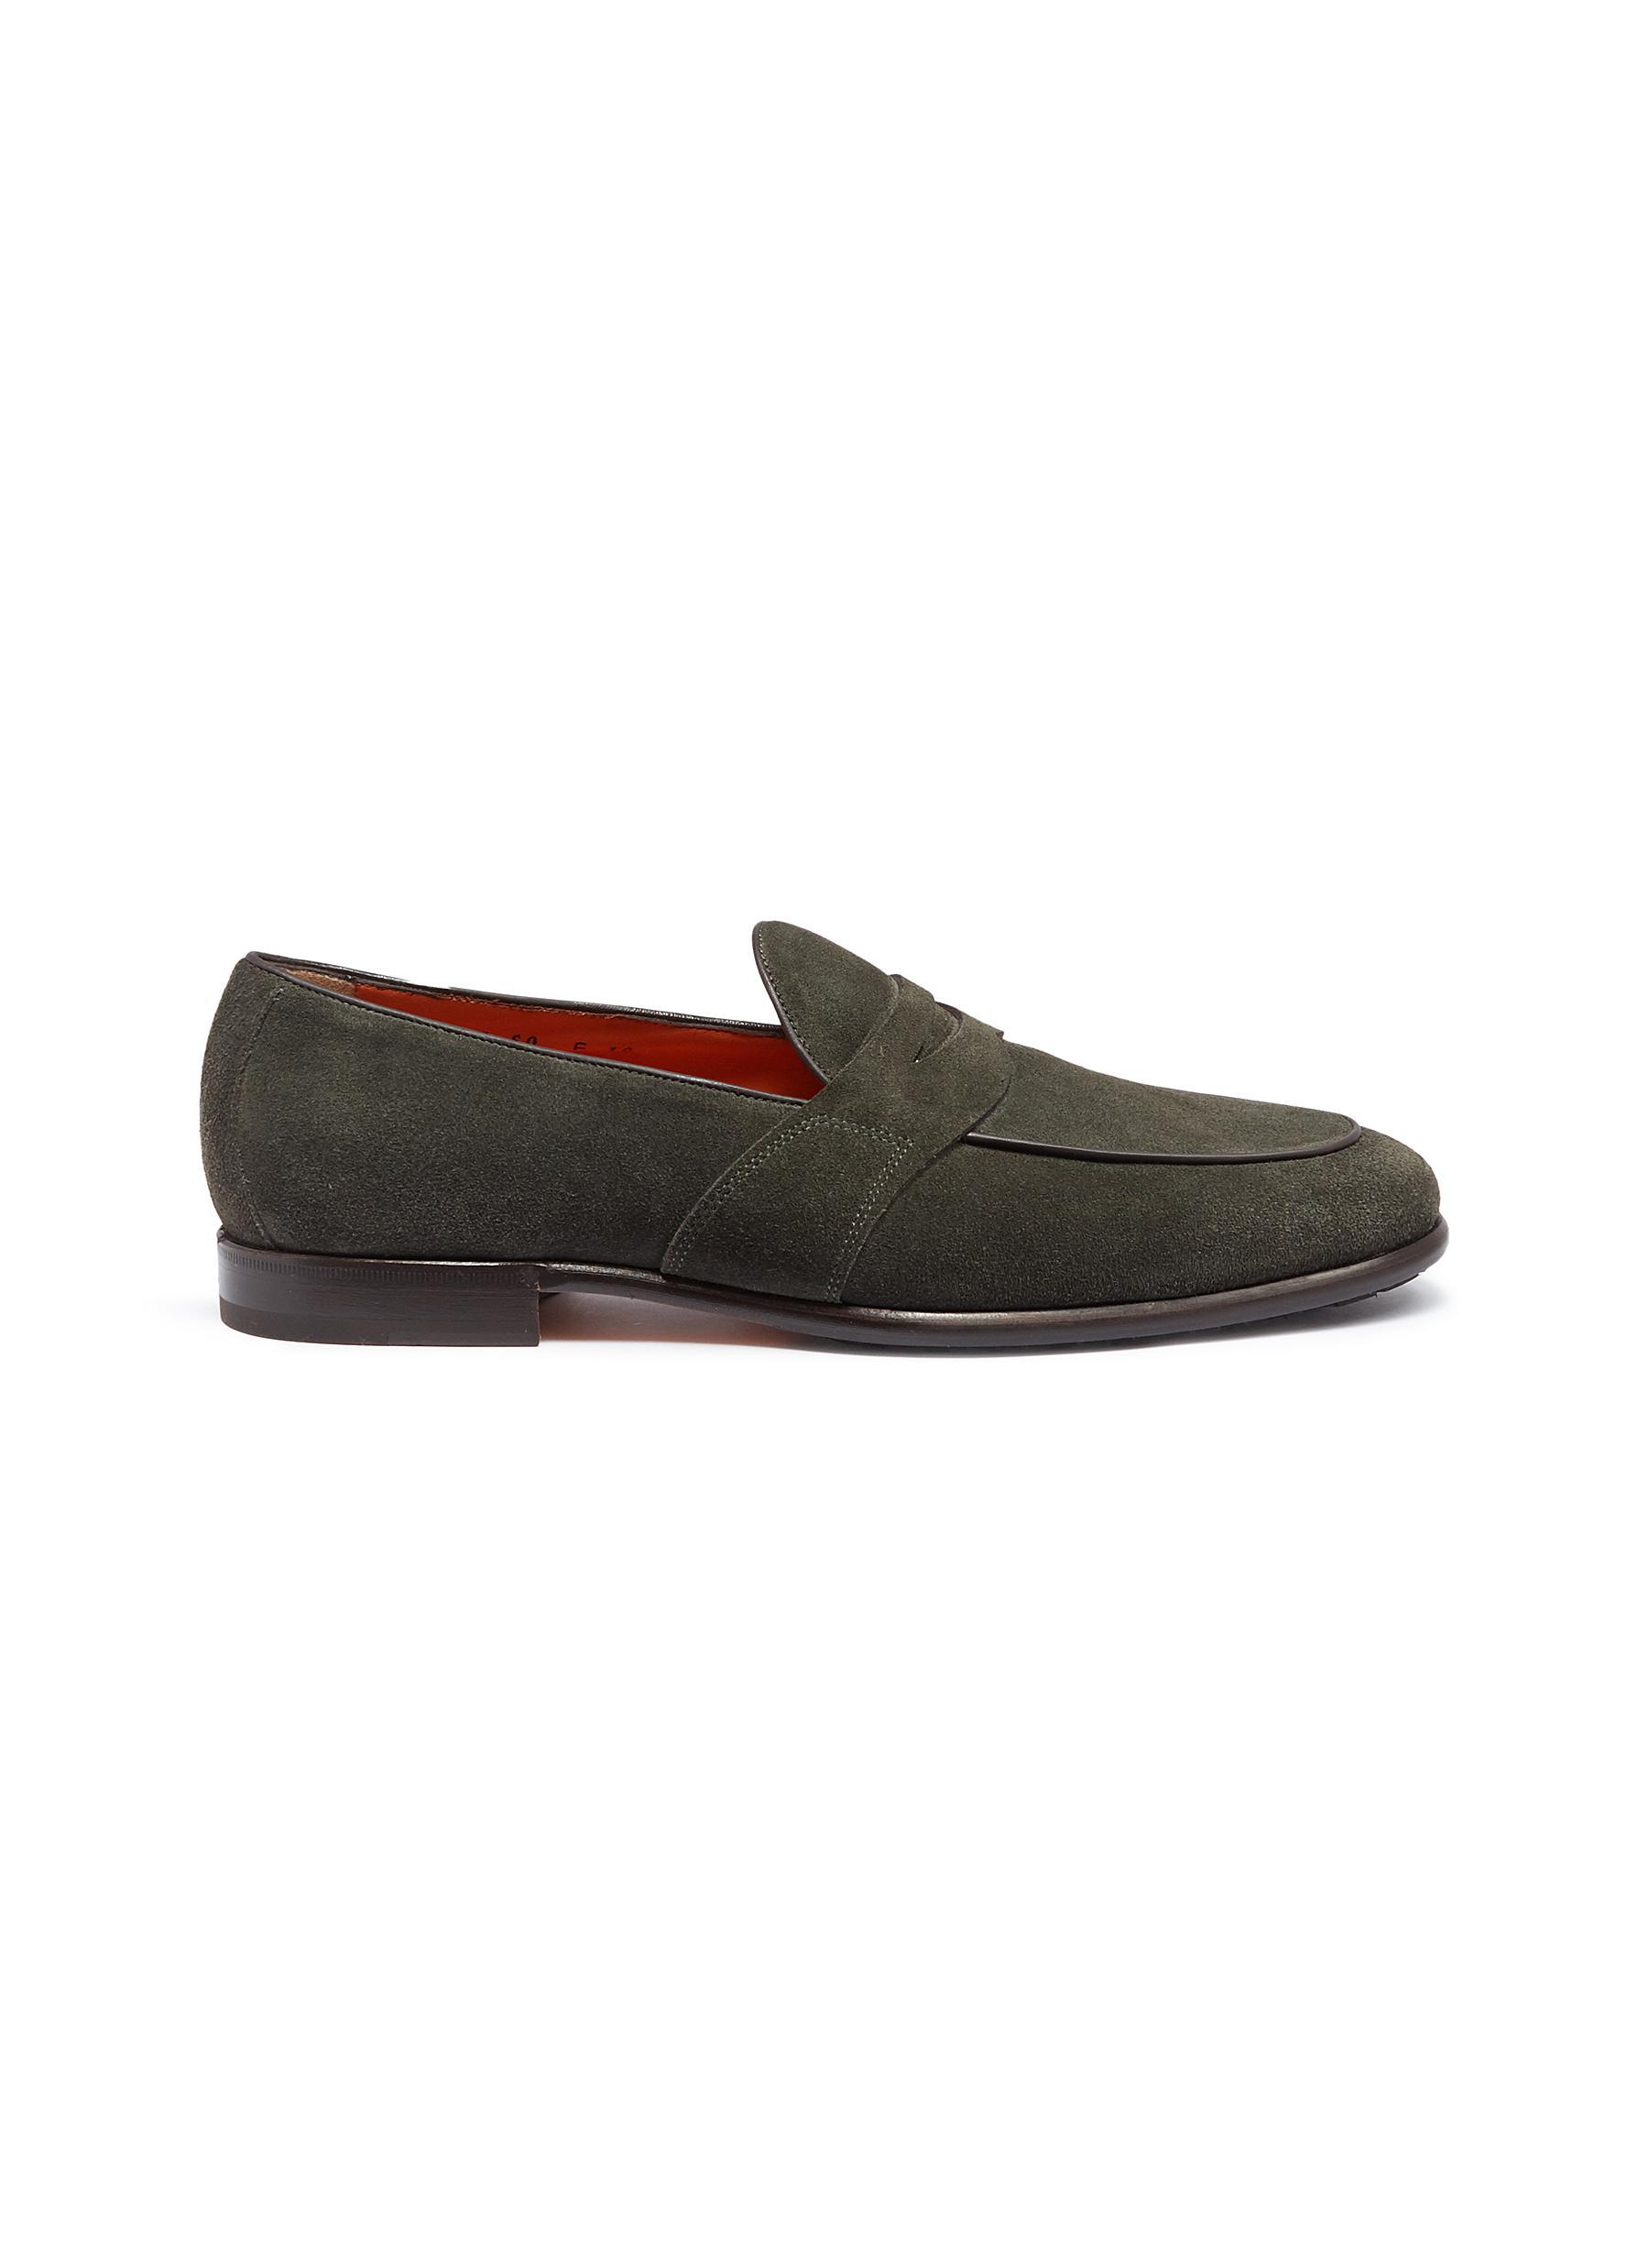 Santoni Suede Penny Loafers in Olive Green (Green) for Men | Lyst